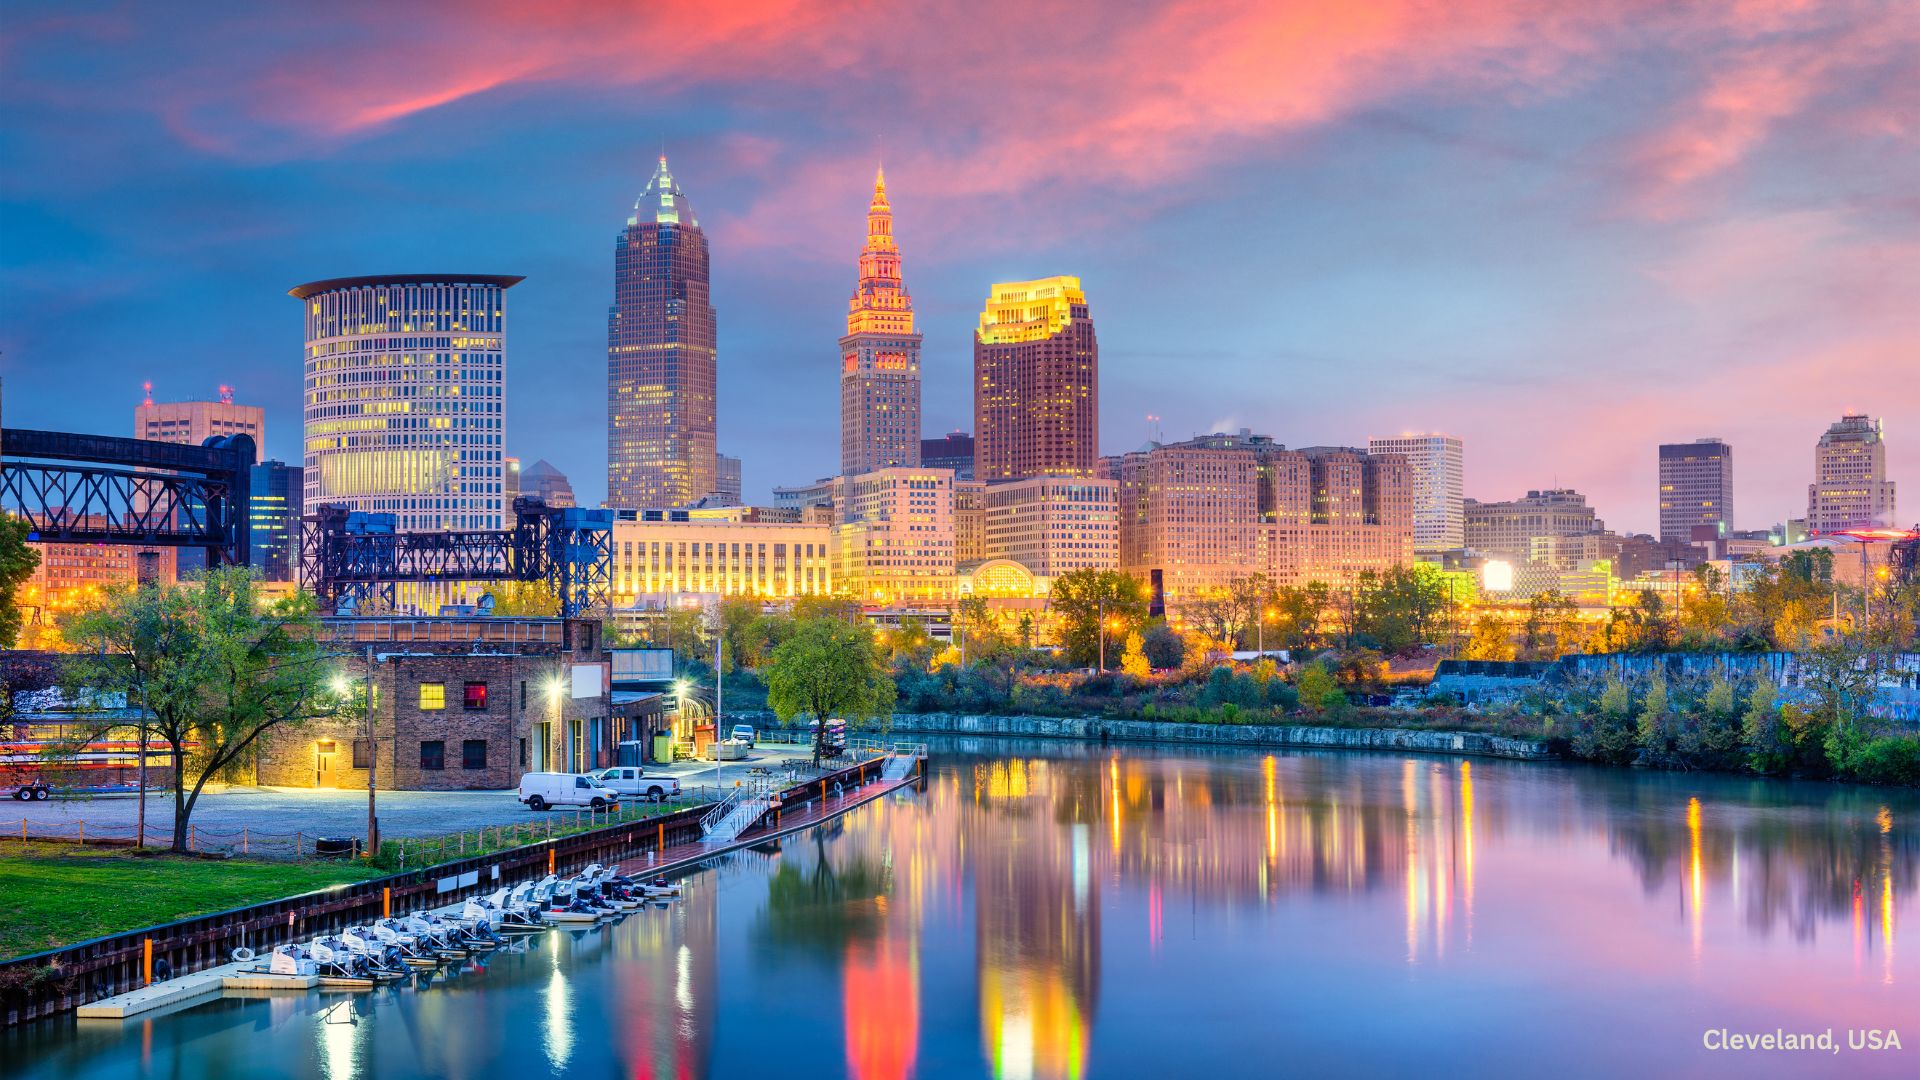 Cleveland, USA - 10 Most Affordable Cities in the World for Housing